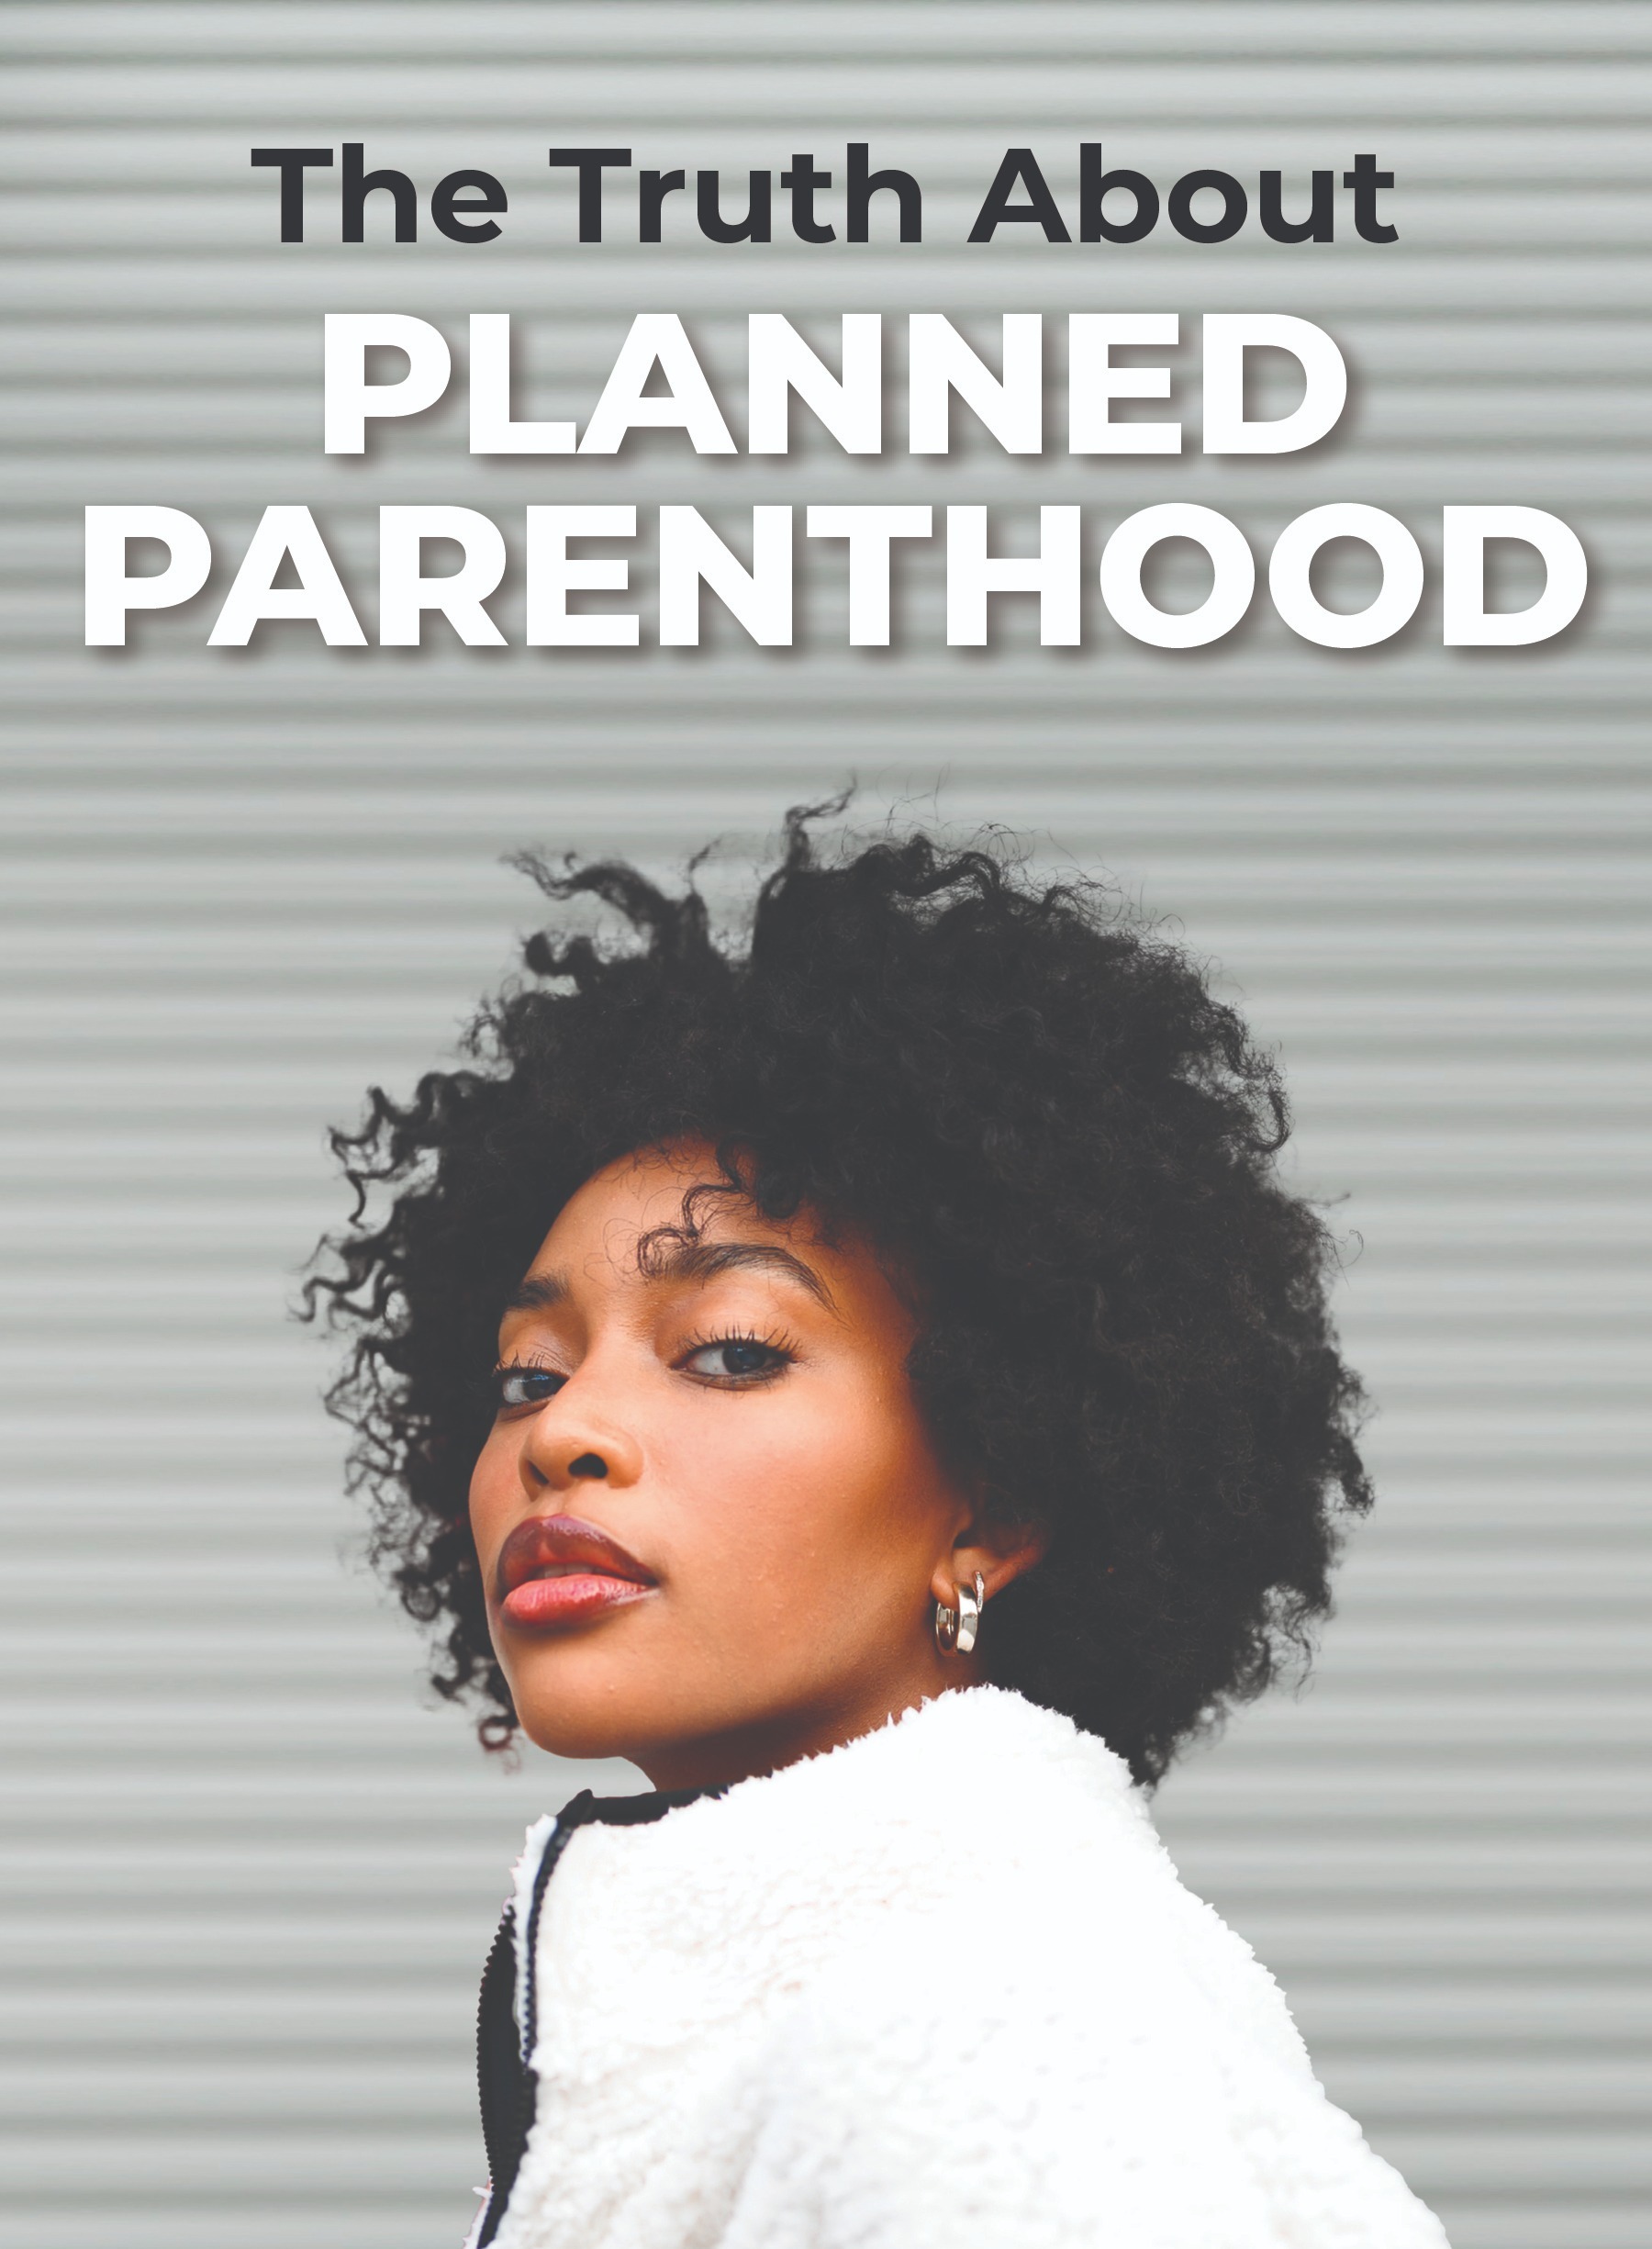 The Truth About Planned Parenthood